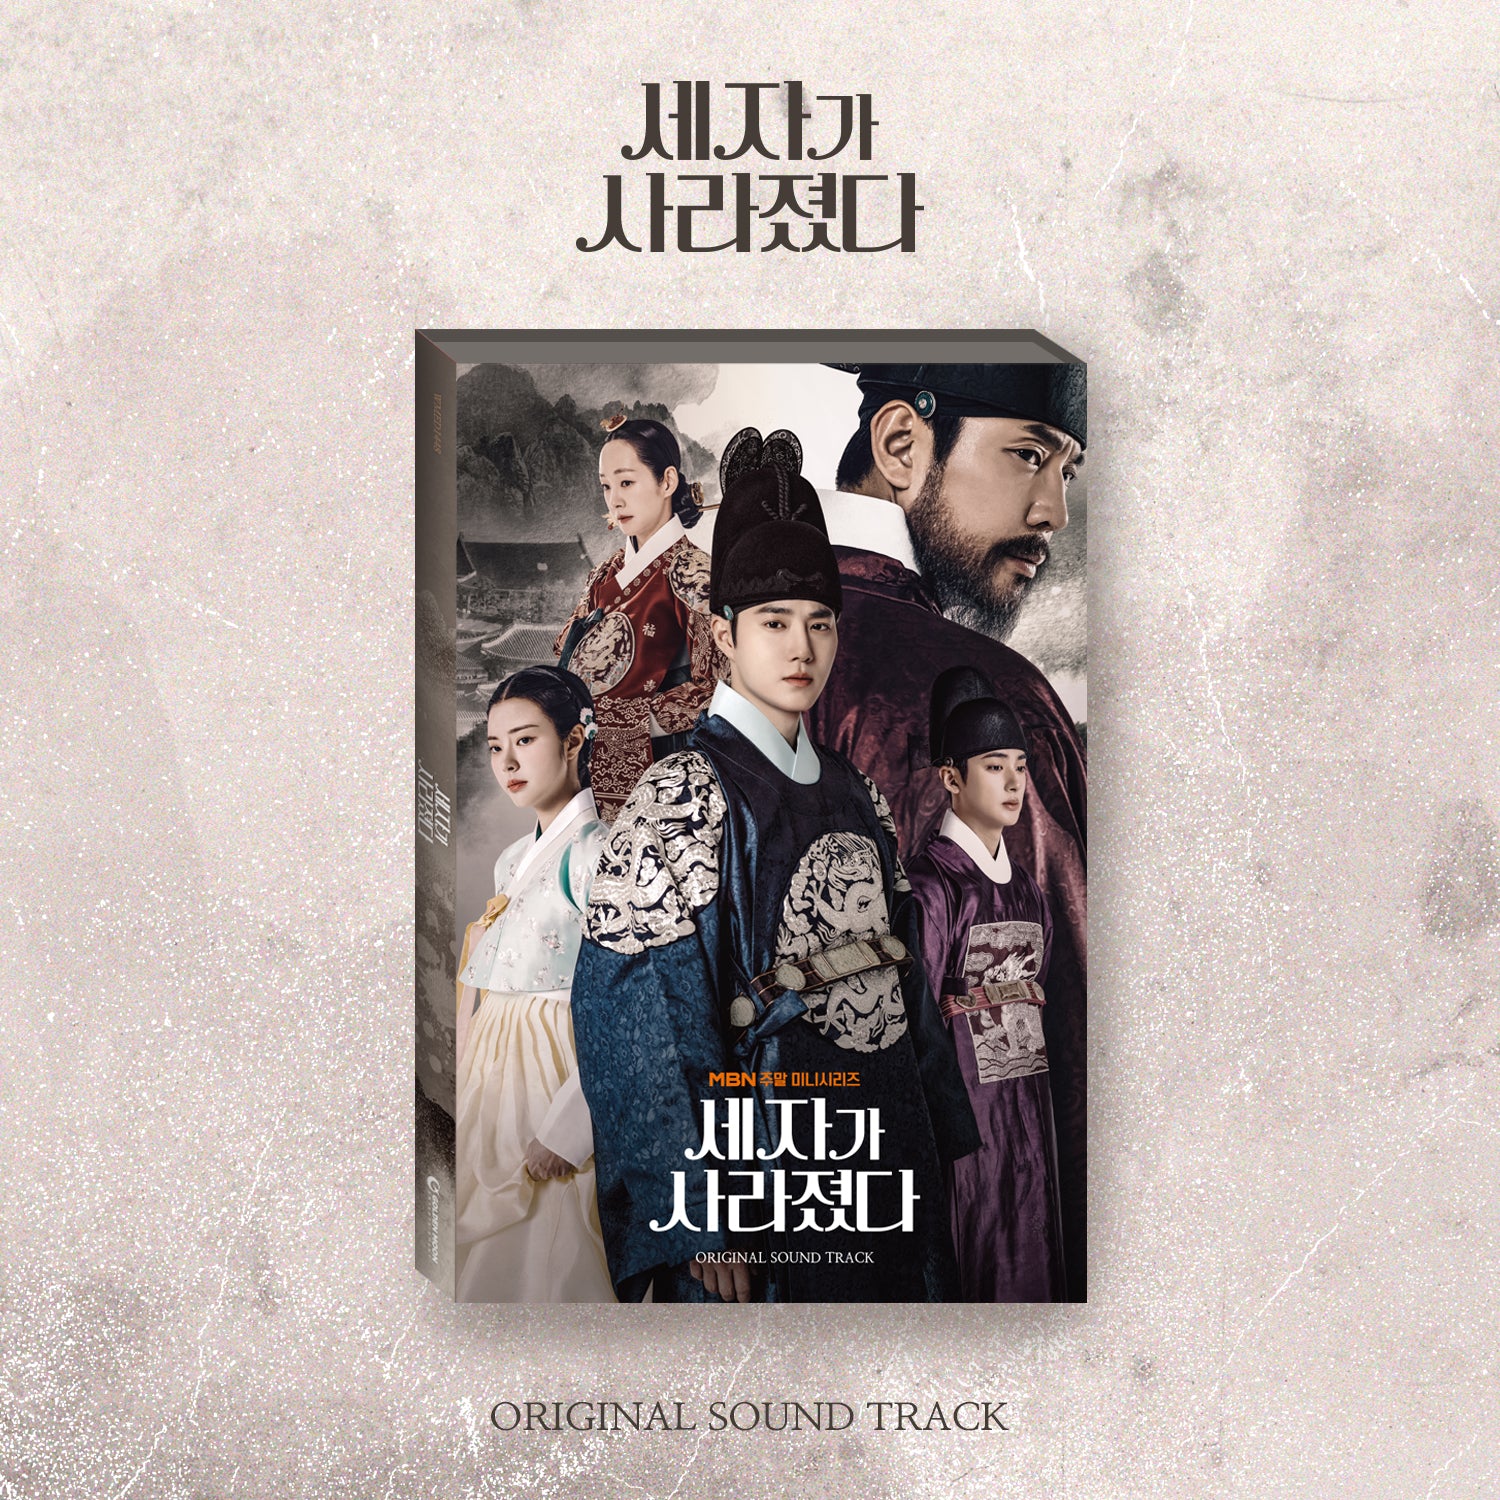 Missing Crown Prince - OST